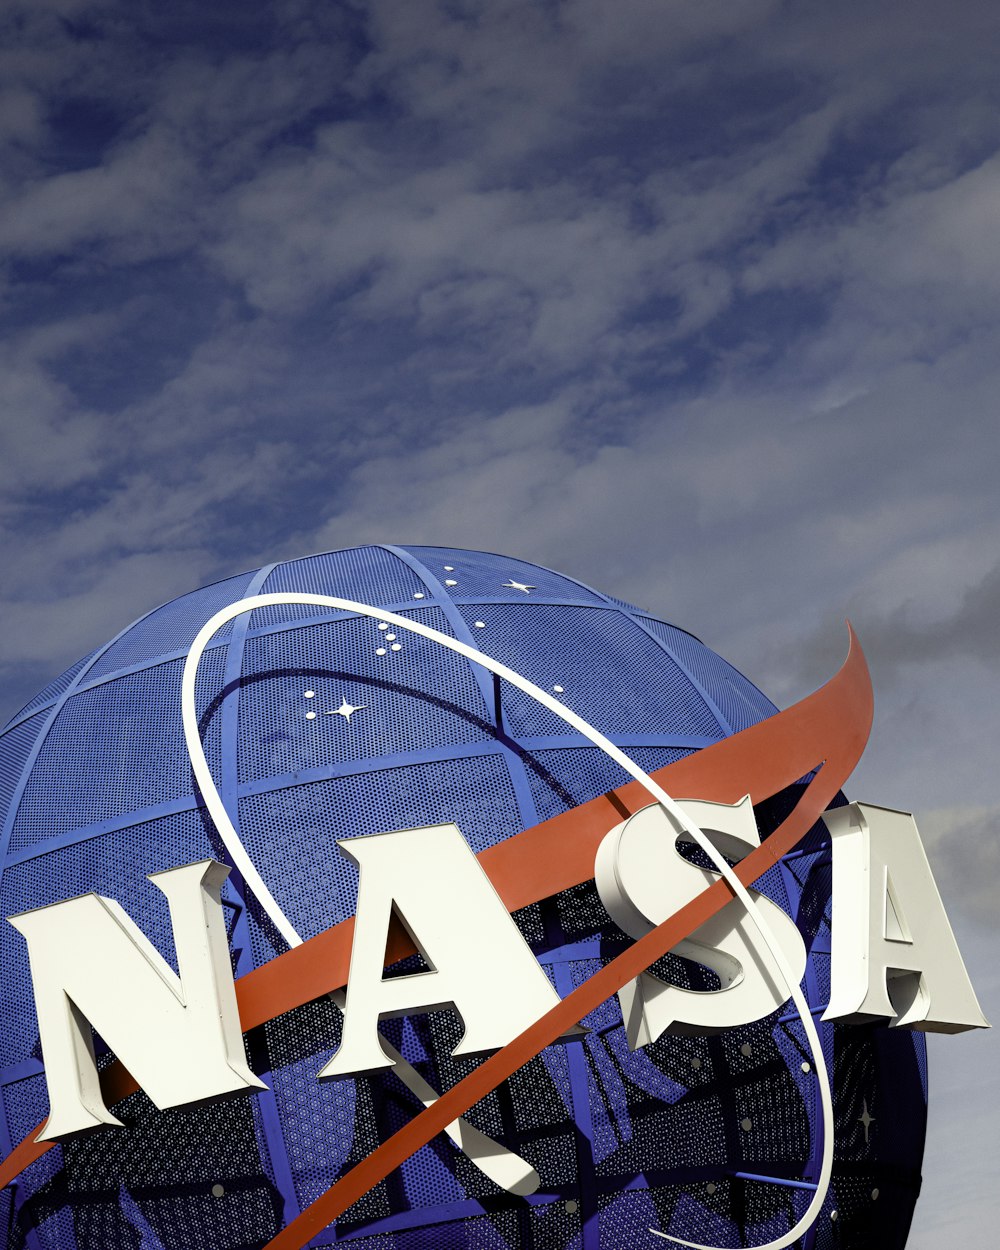 a nasa sign is shown against a blue sky